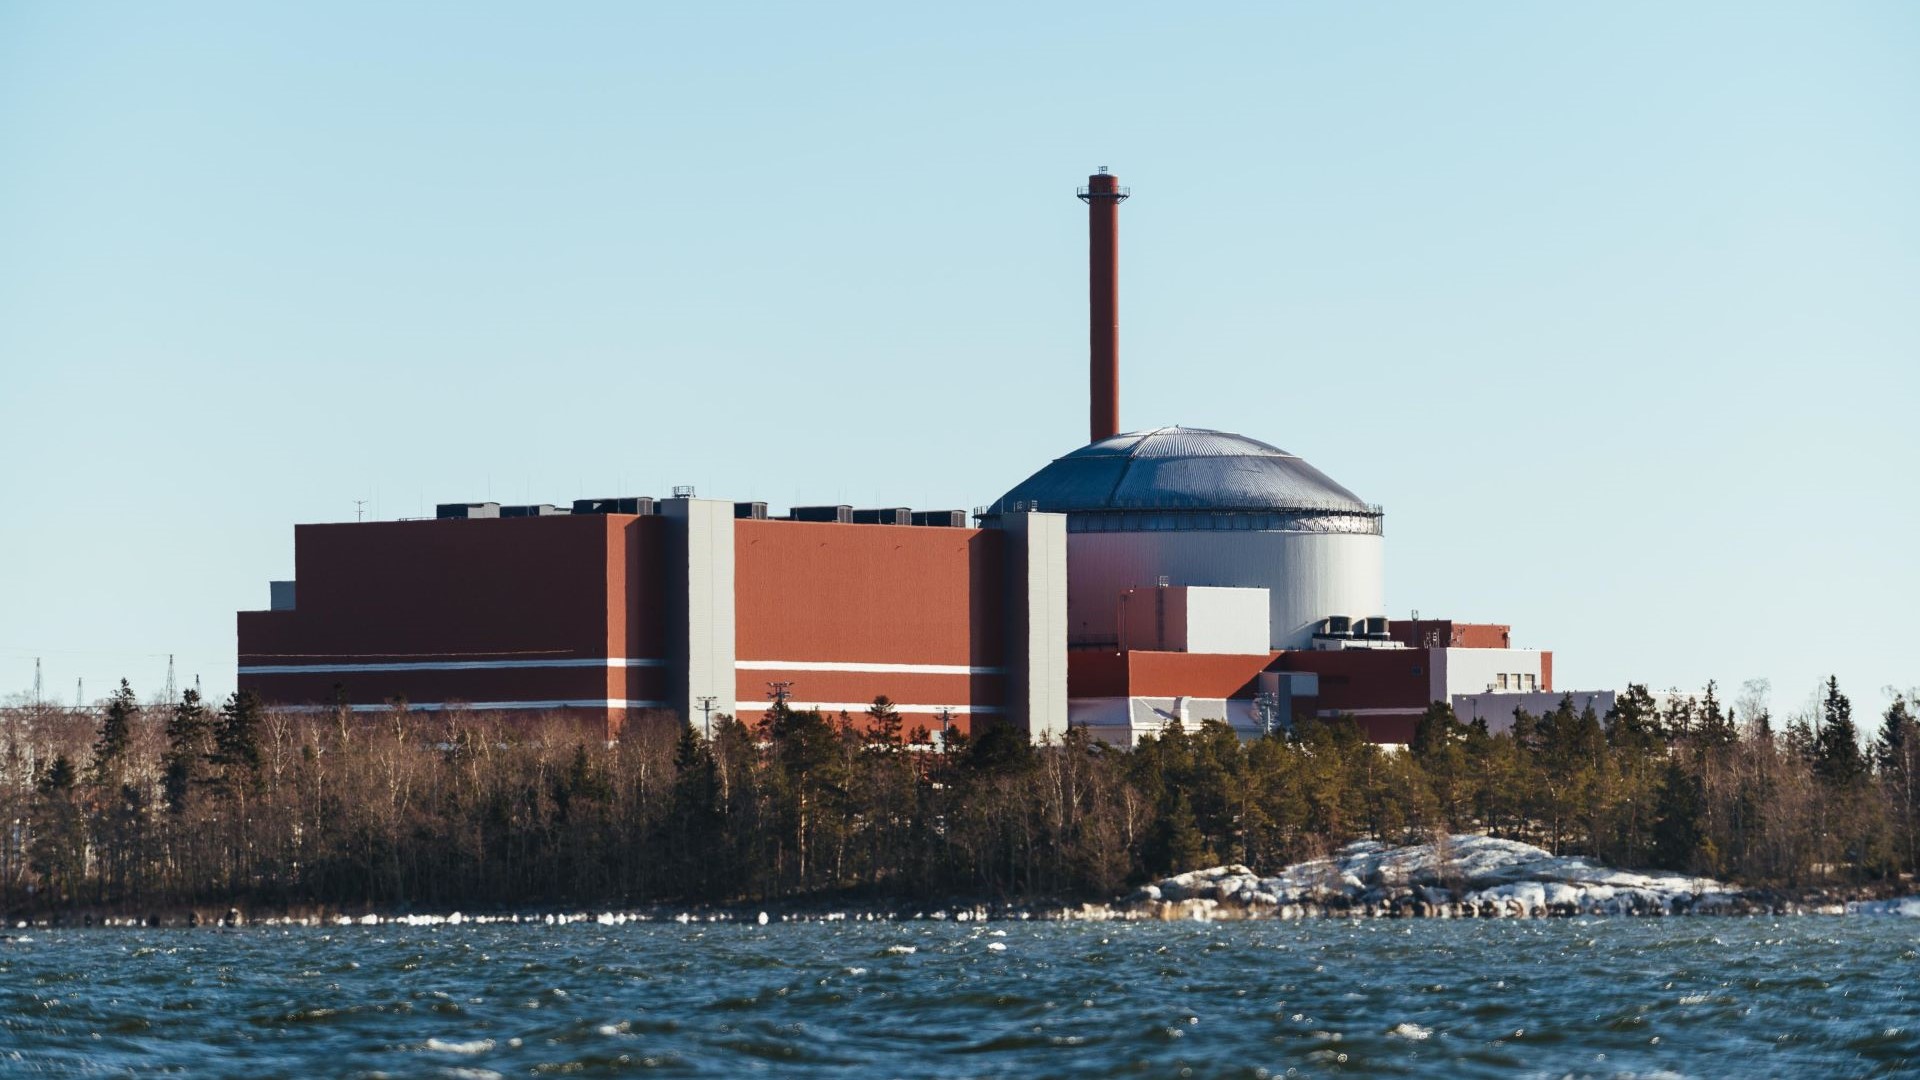 Finland's Olkiluoto nuclear power station